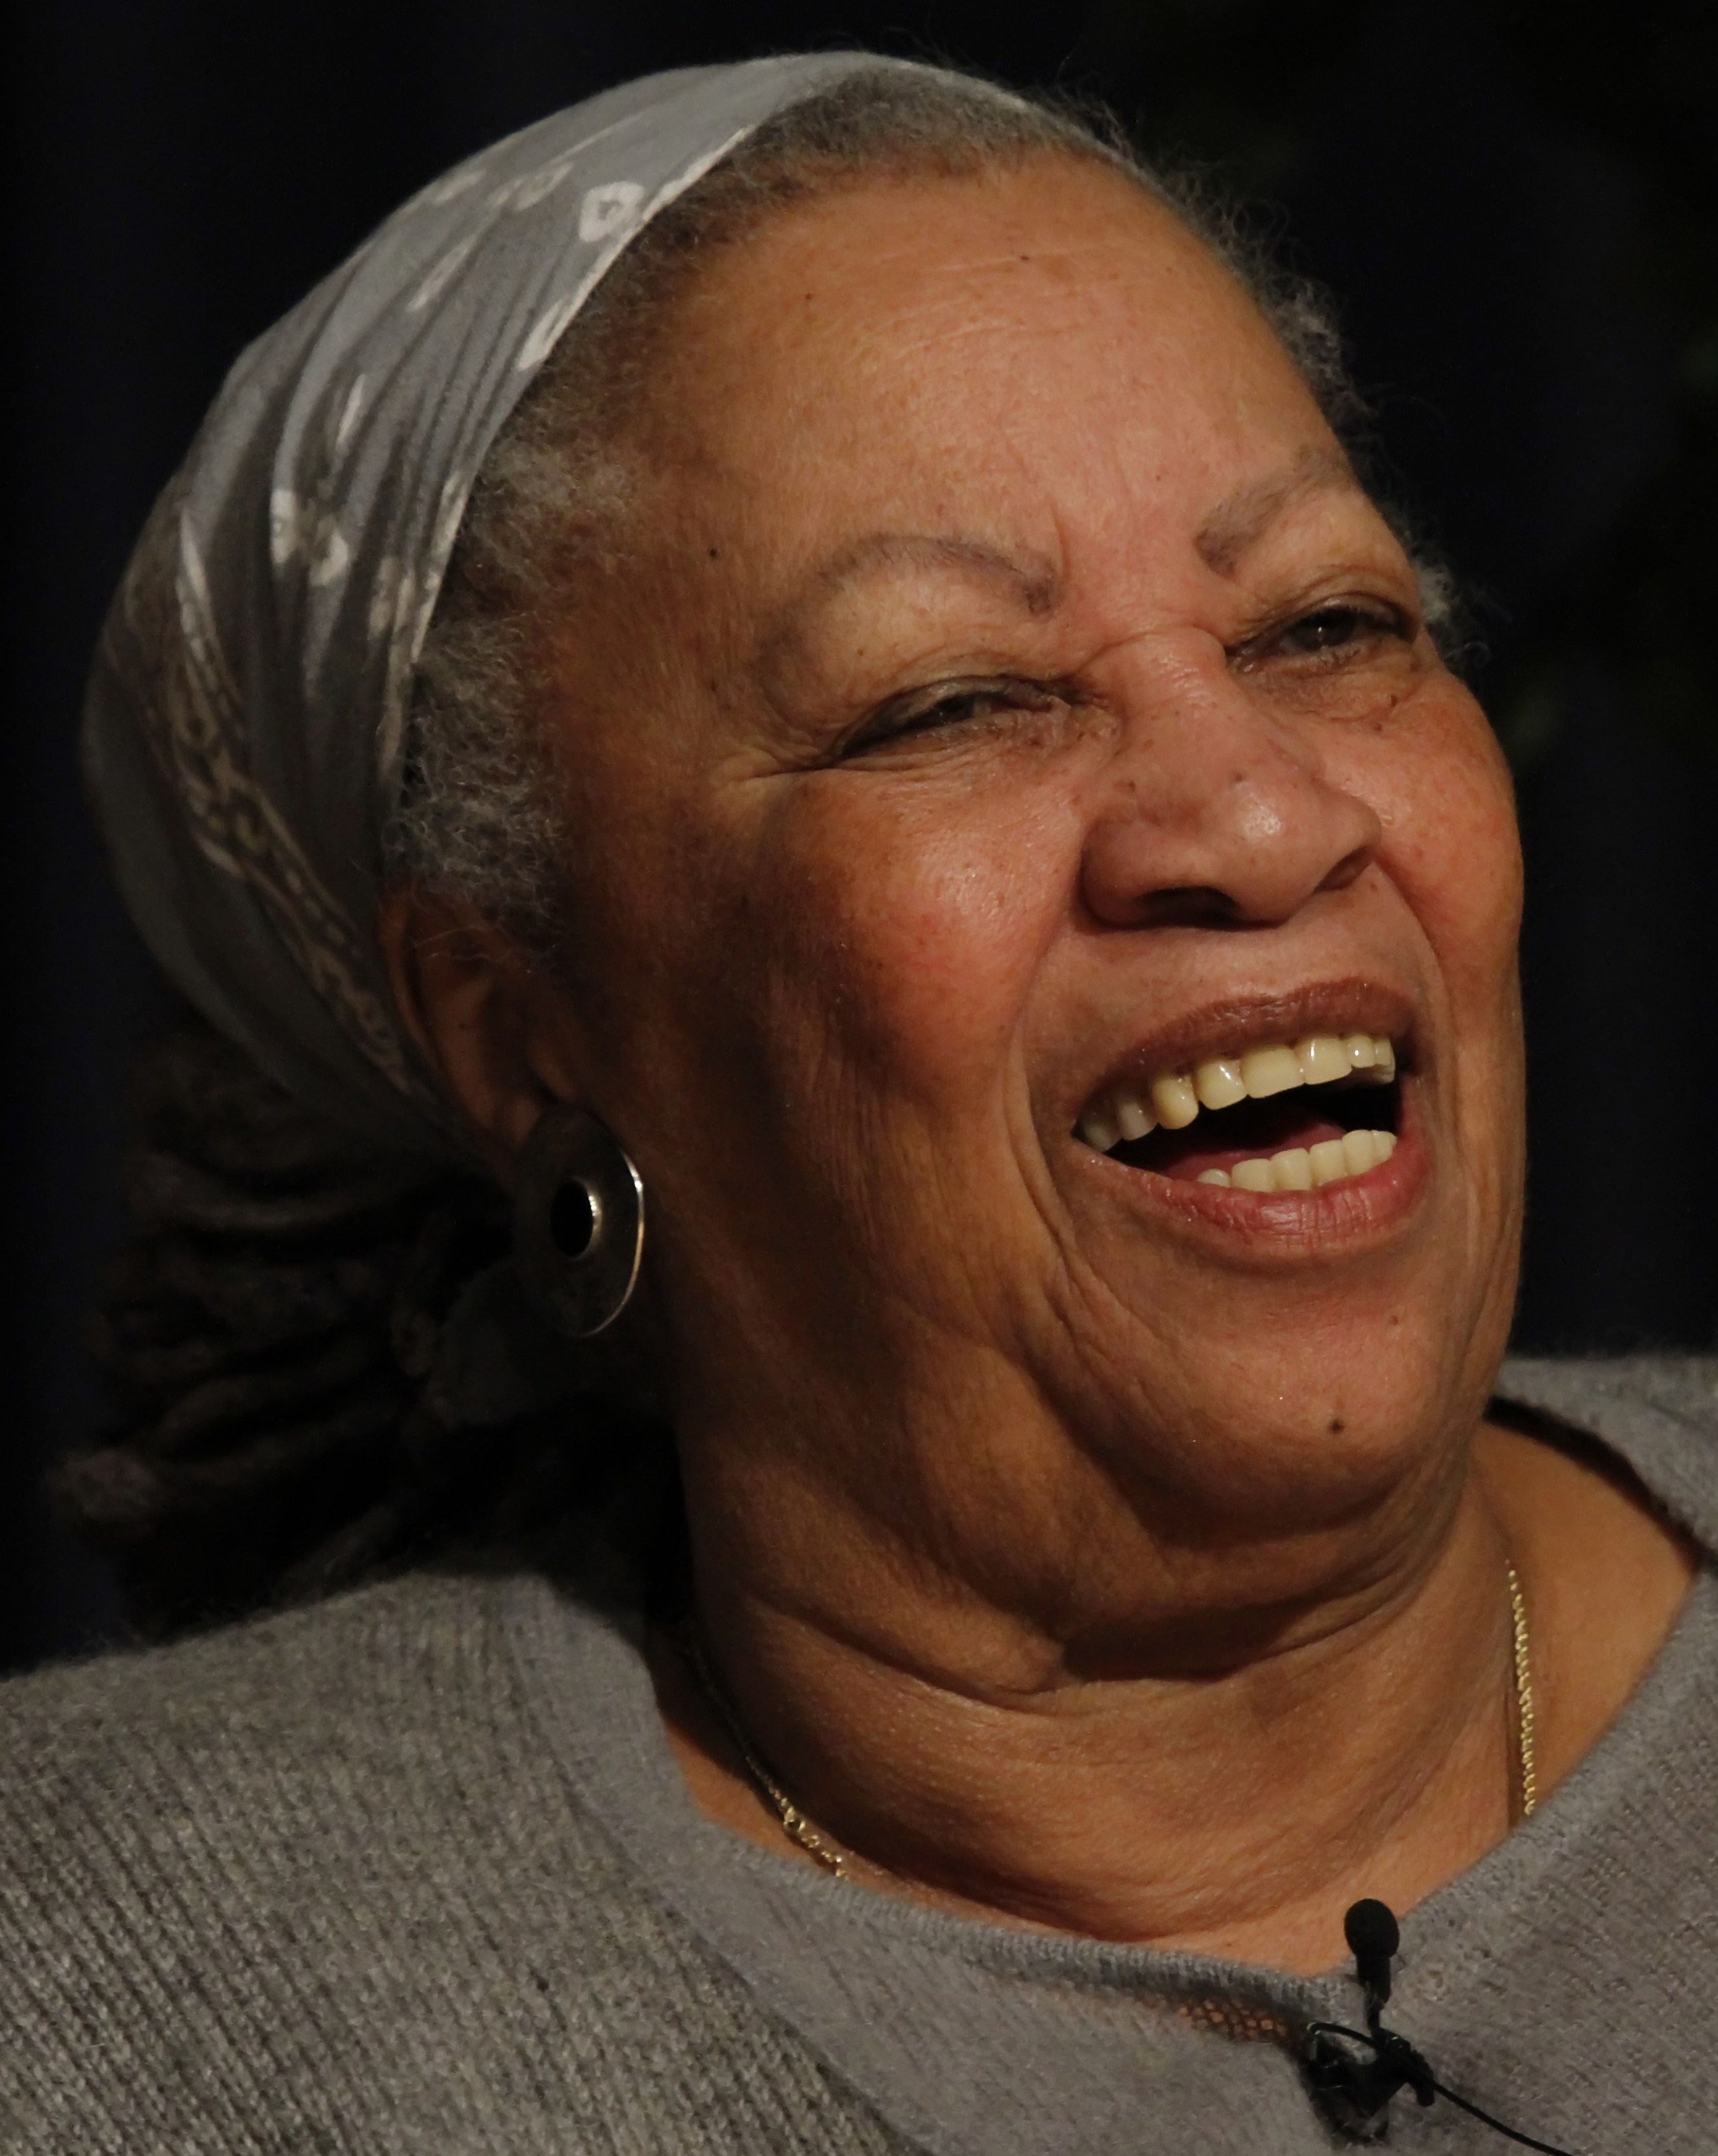 Toni Morrison, lecture at West Point Military Academy in March, 2013. (public domain)